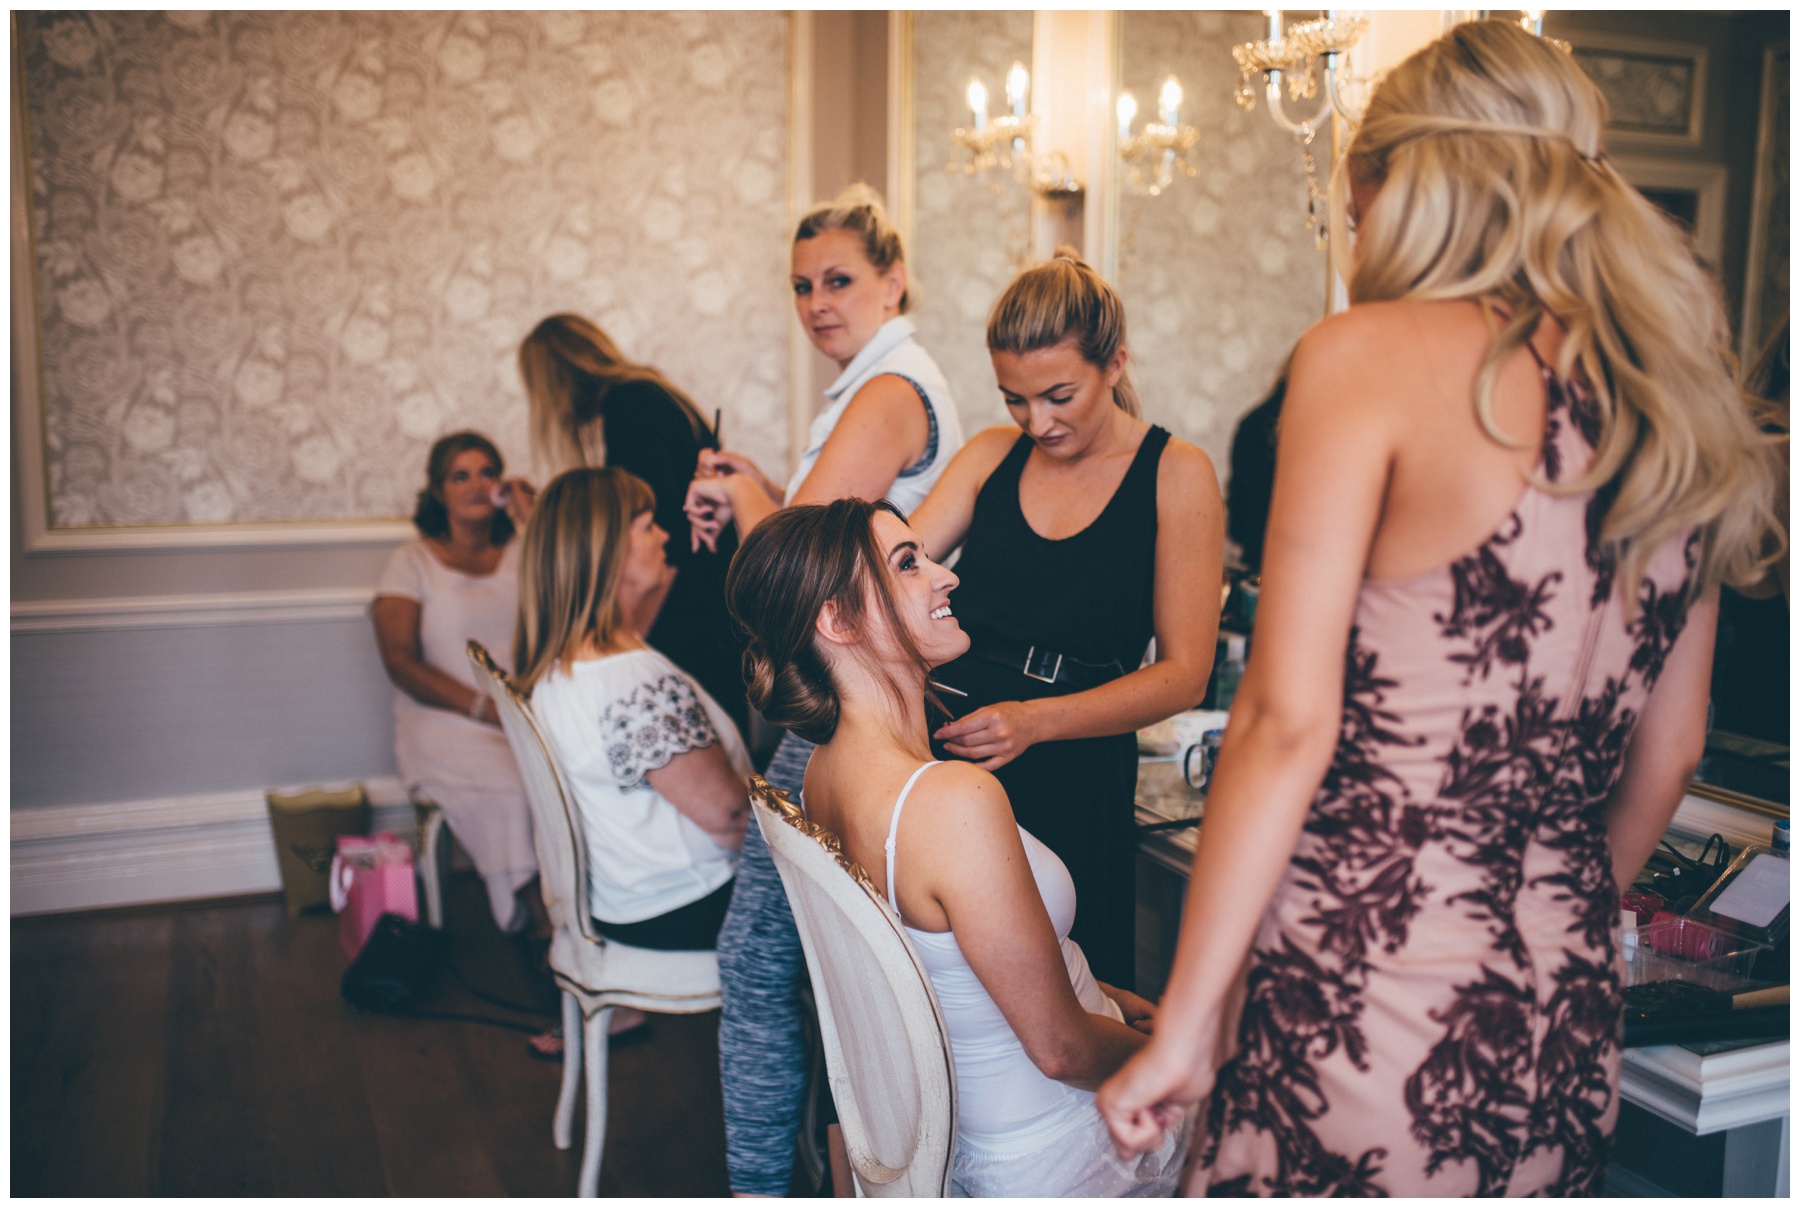 Beautiful bride getting her wedding make-up done in the bridal suite at Tilstone House in Tarporley, Cheshire.